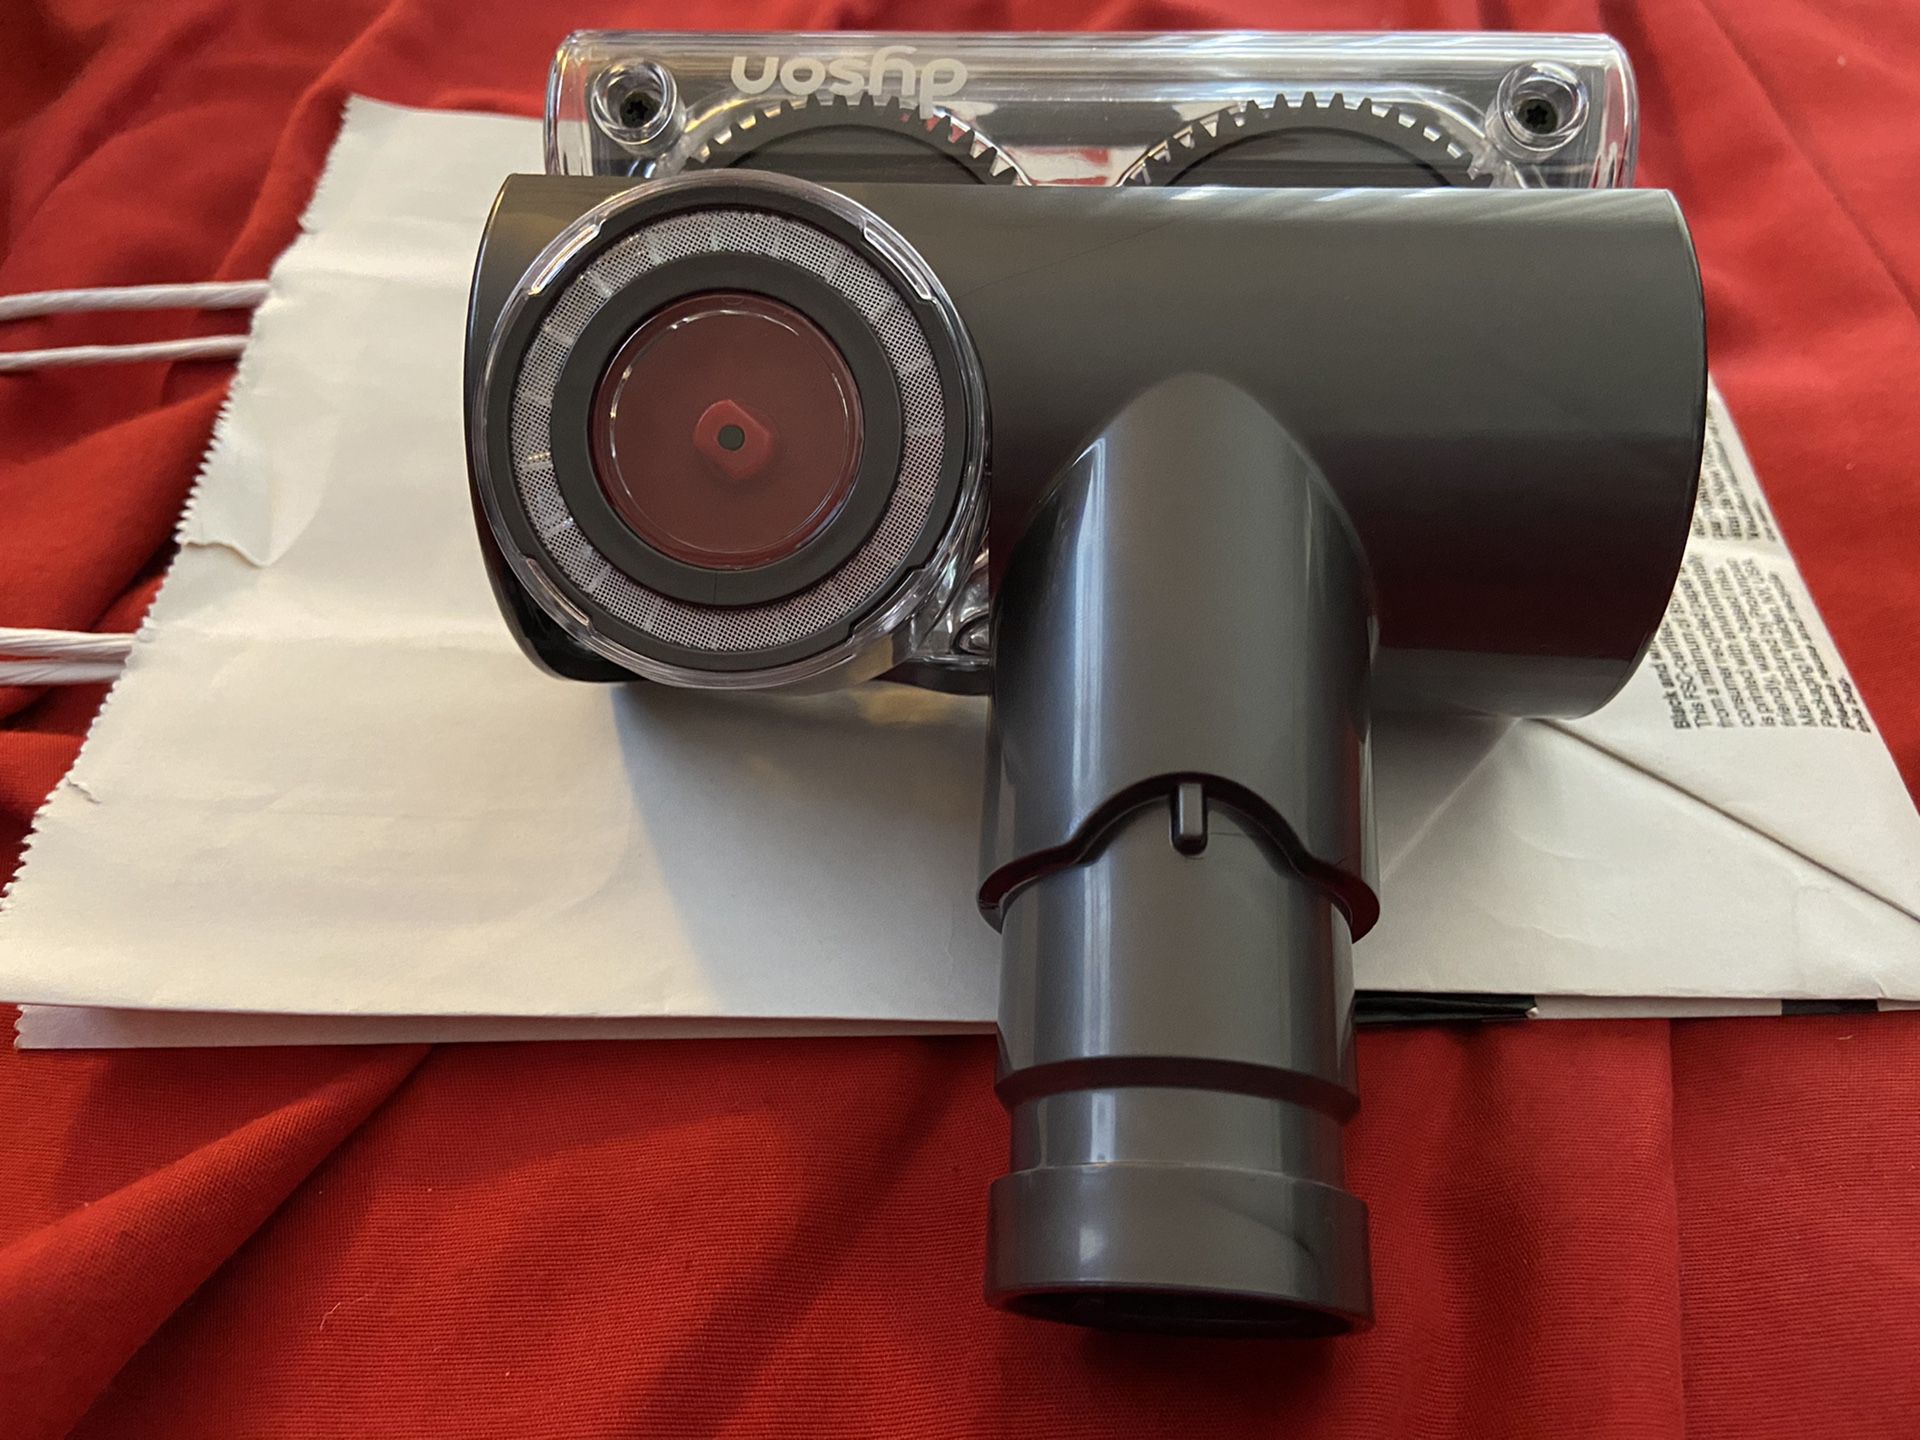 2 brand new attachments for Dyson Ball vacuum